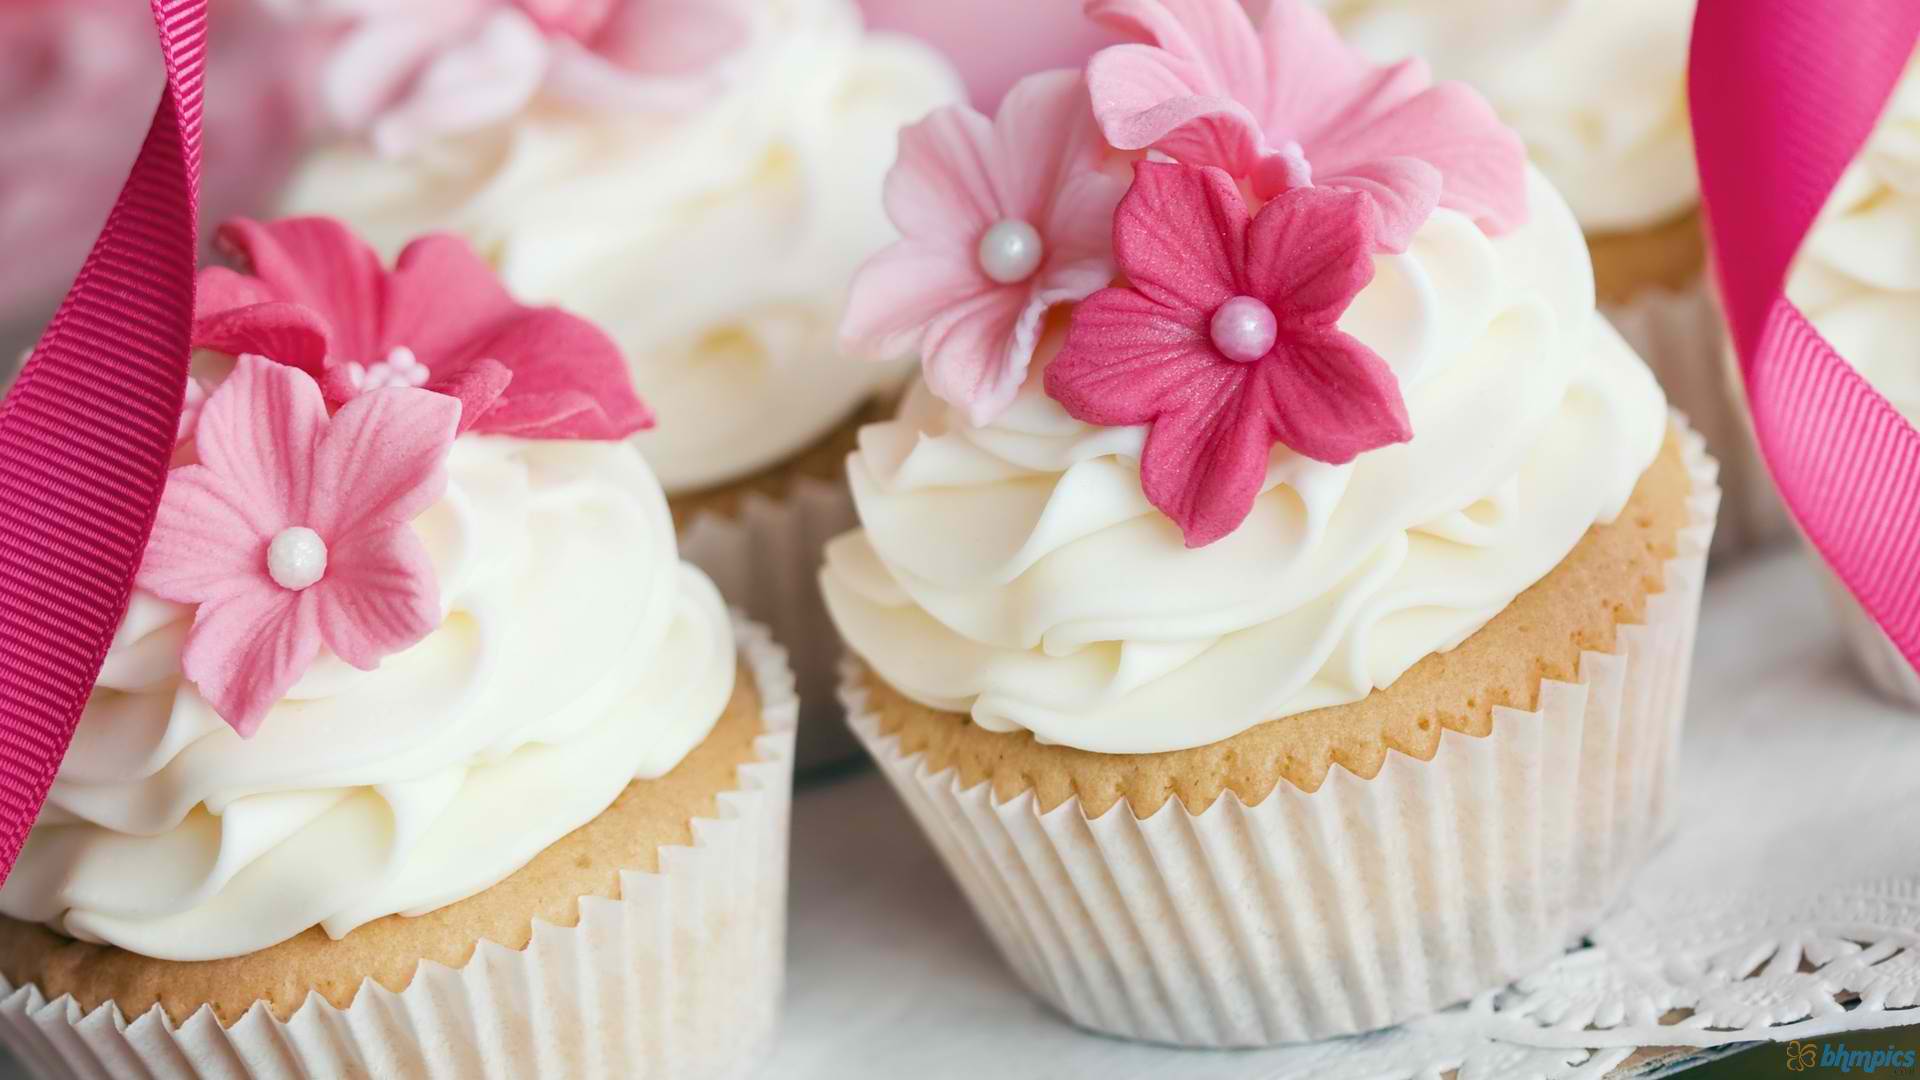 special-occasion-cupcakes-wallpapers-hd-free-cupcake-wallpaper-hd